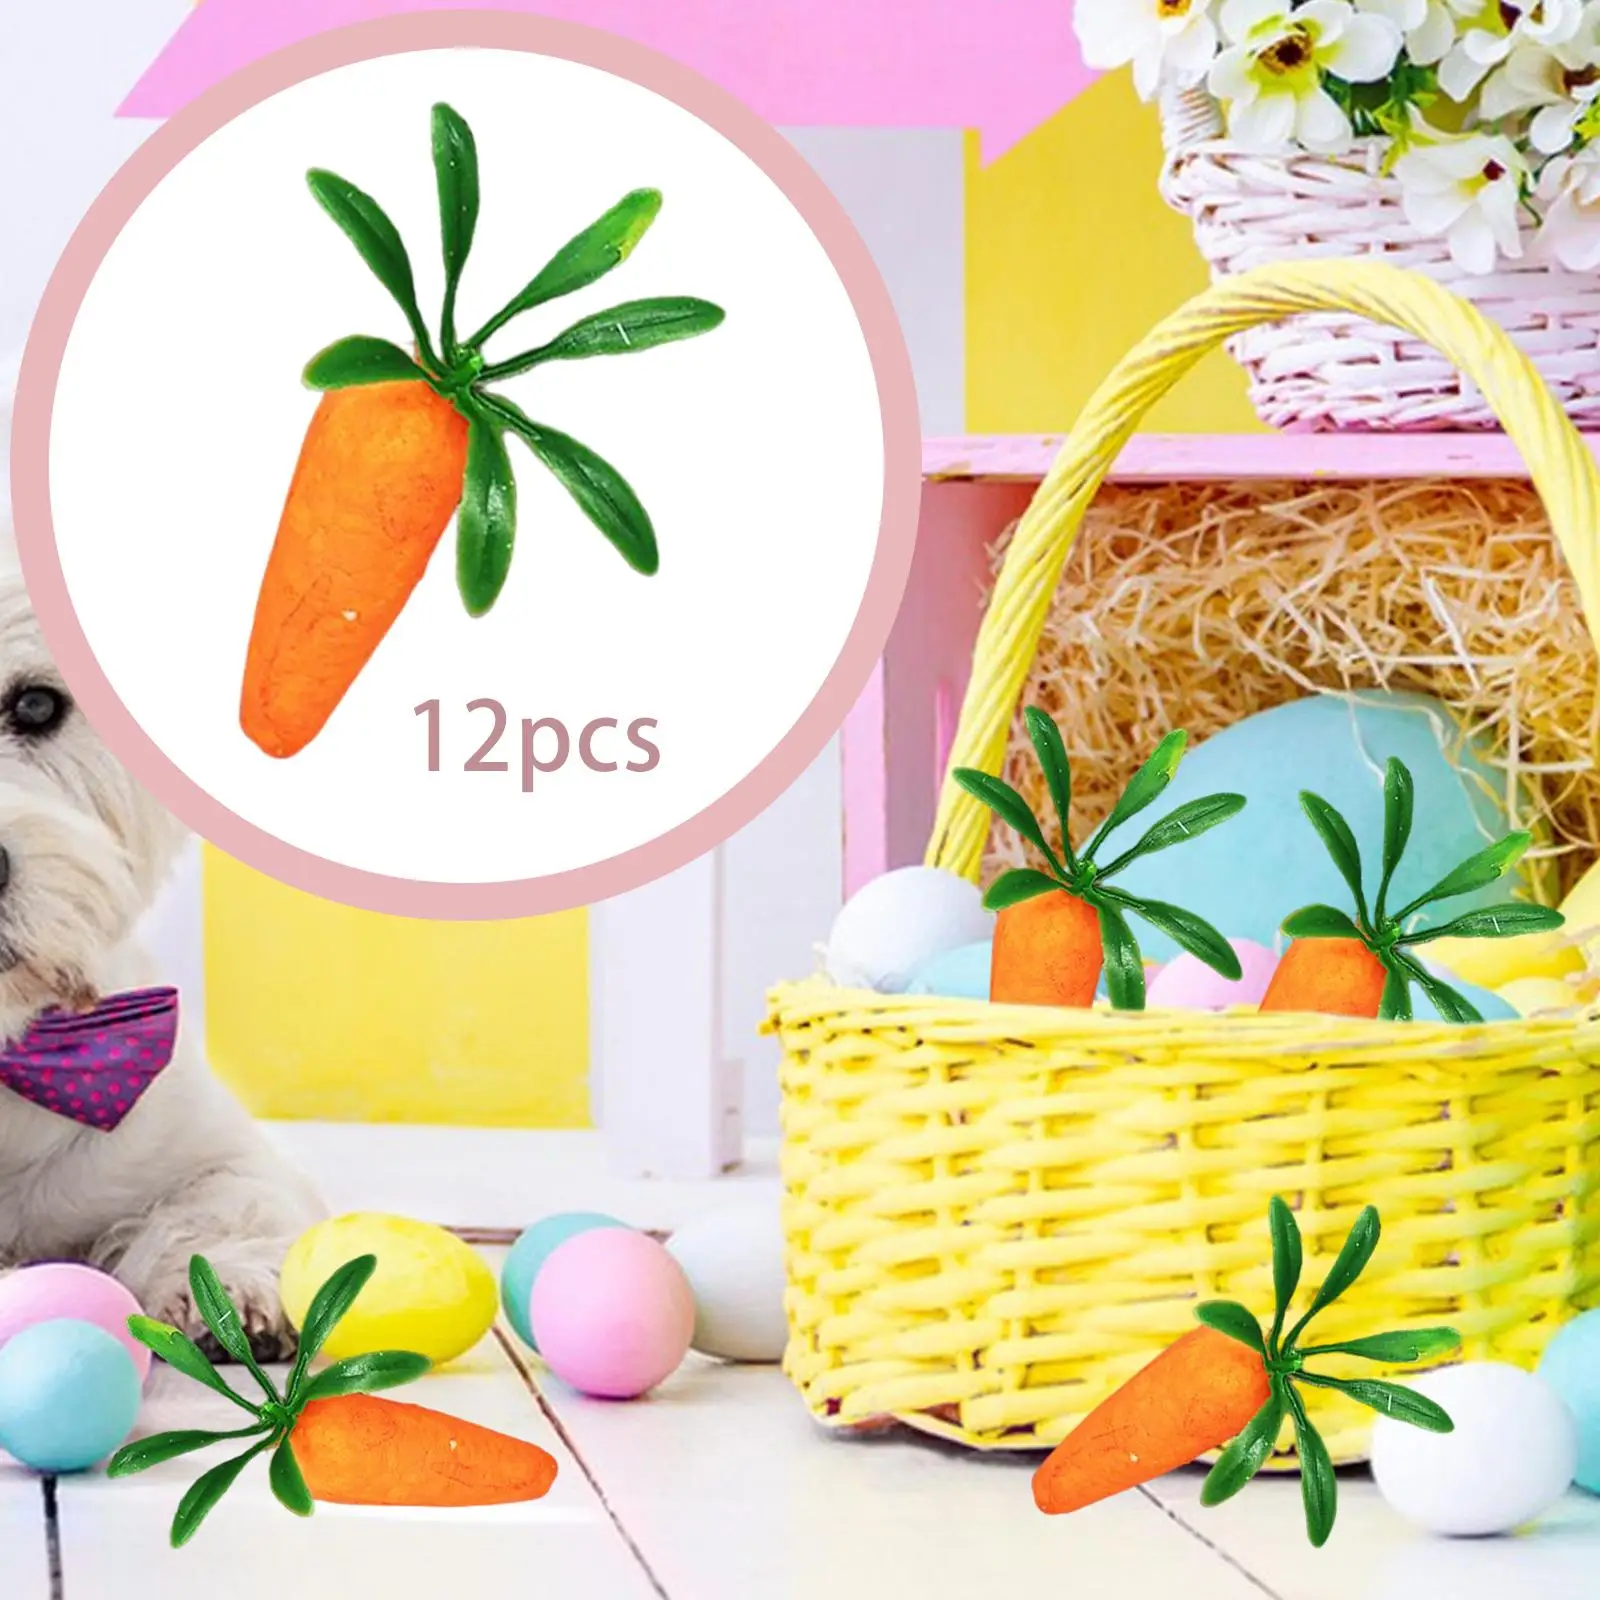 12x Artificial Easter Carrots Spring Decoration Decorative DIY Crafts Thanksgiving Harvest Carrots for Photo Props Home Decor